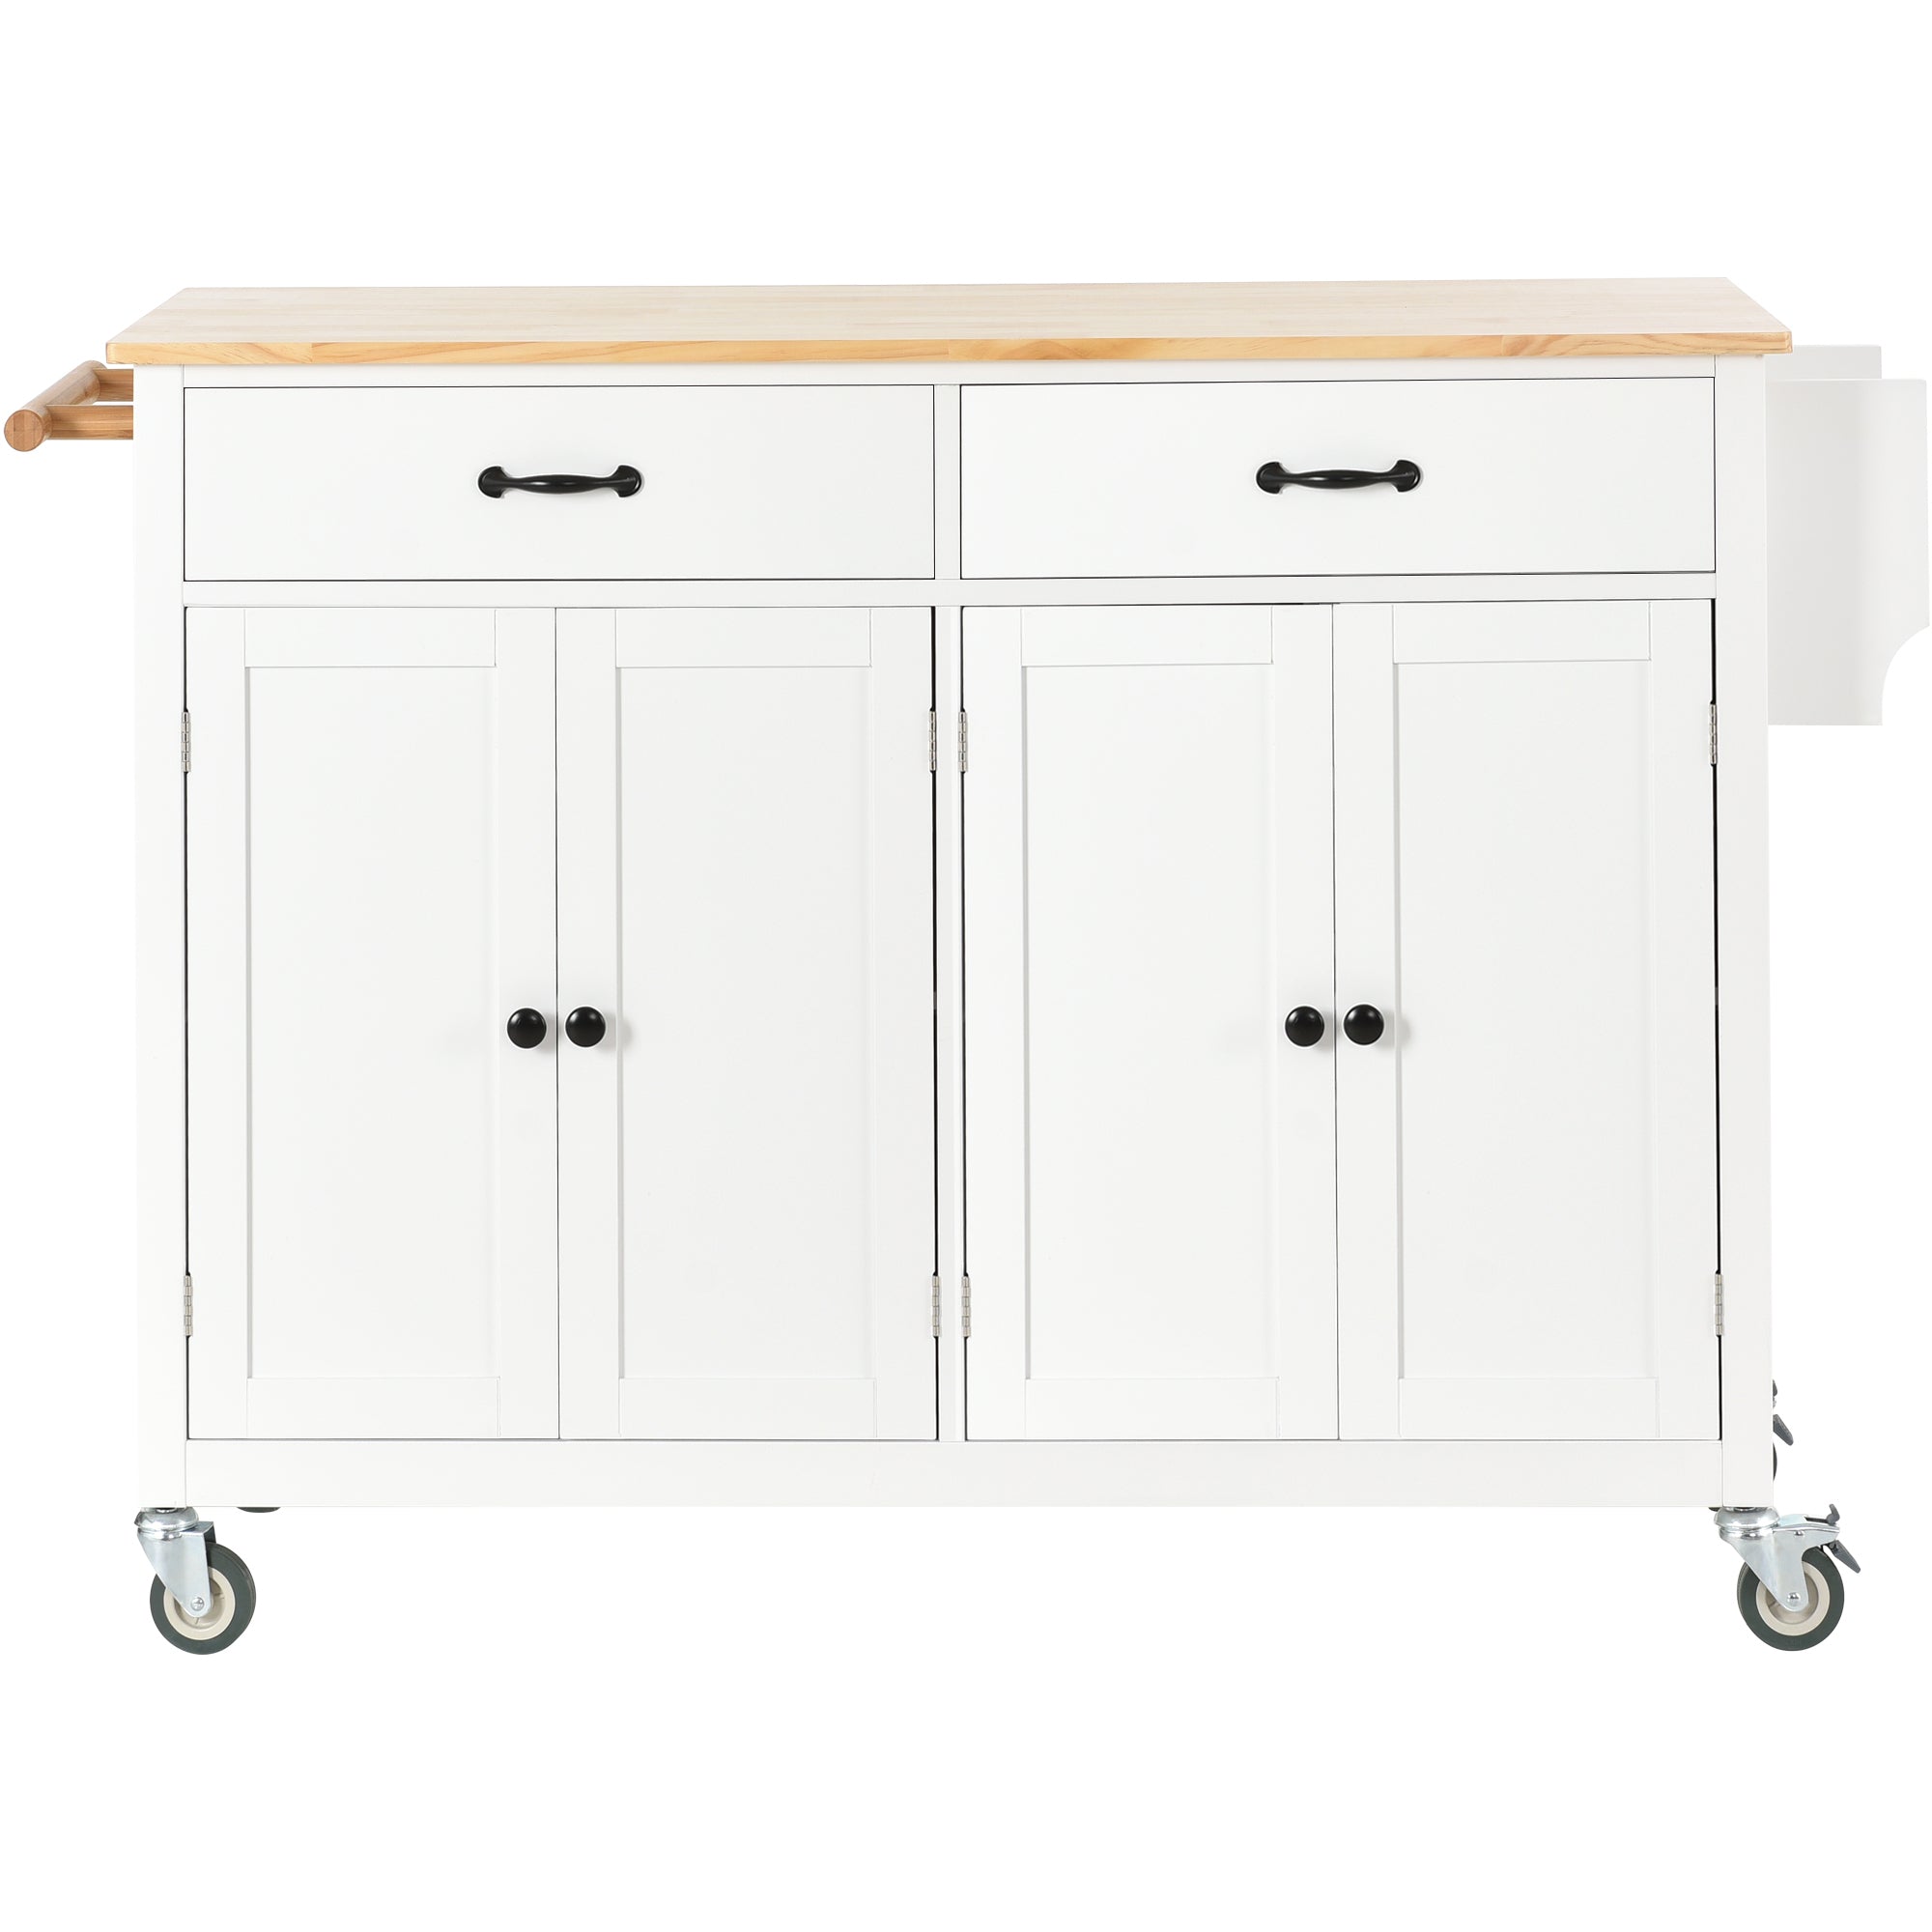 54.33" White Kitchen Island Cart with Solid Wood Top and Locking Wheels